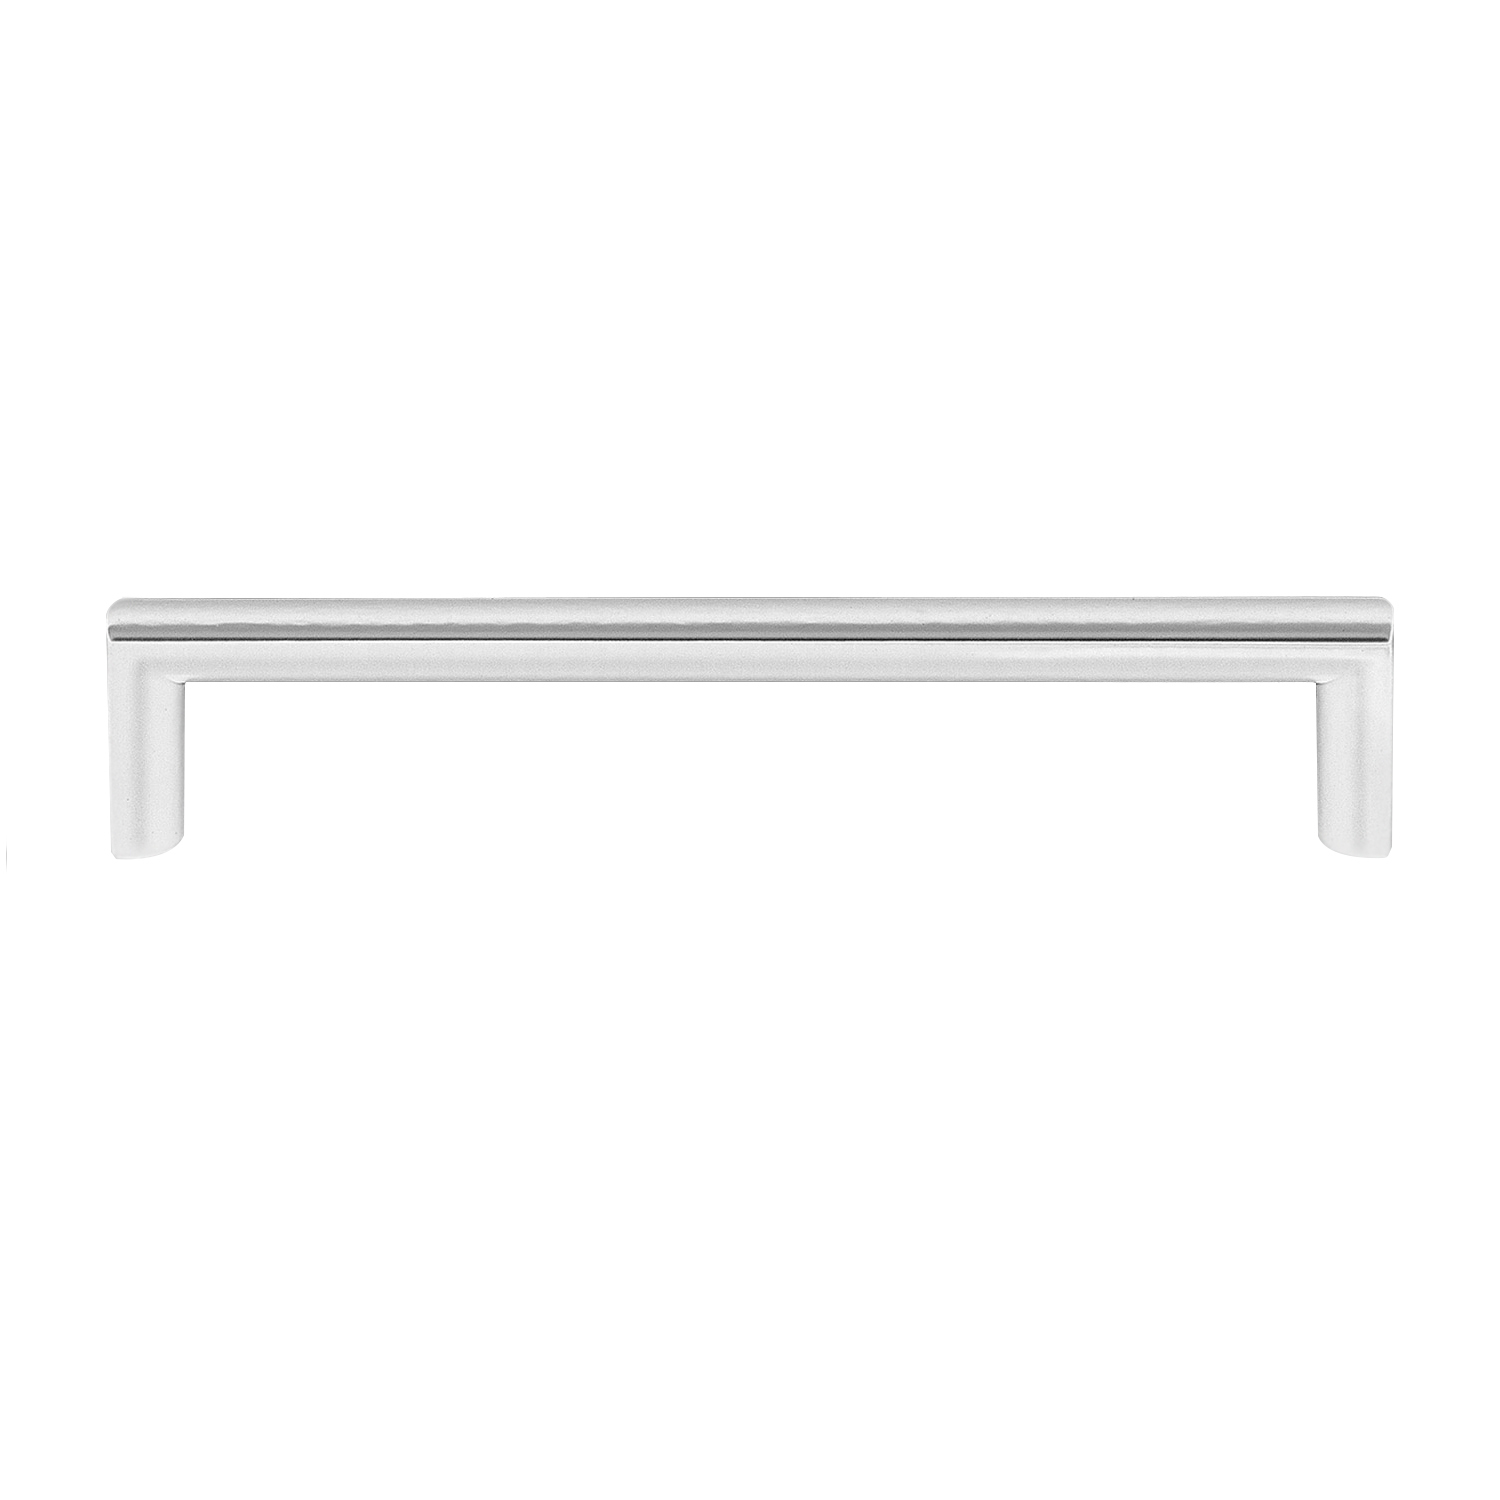 Kethy DL370 32mm only Edge Pull Straight DL370 Series Brushed Stainless 